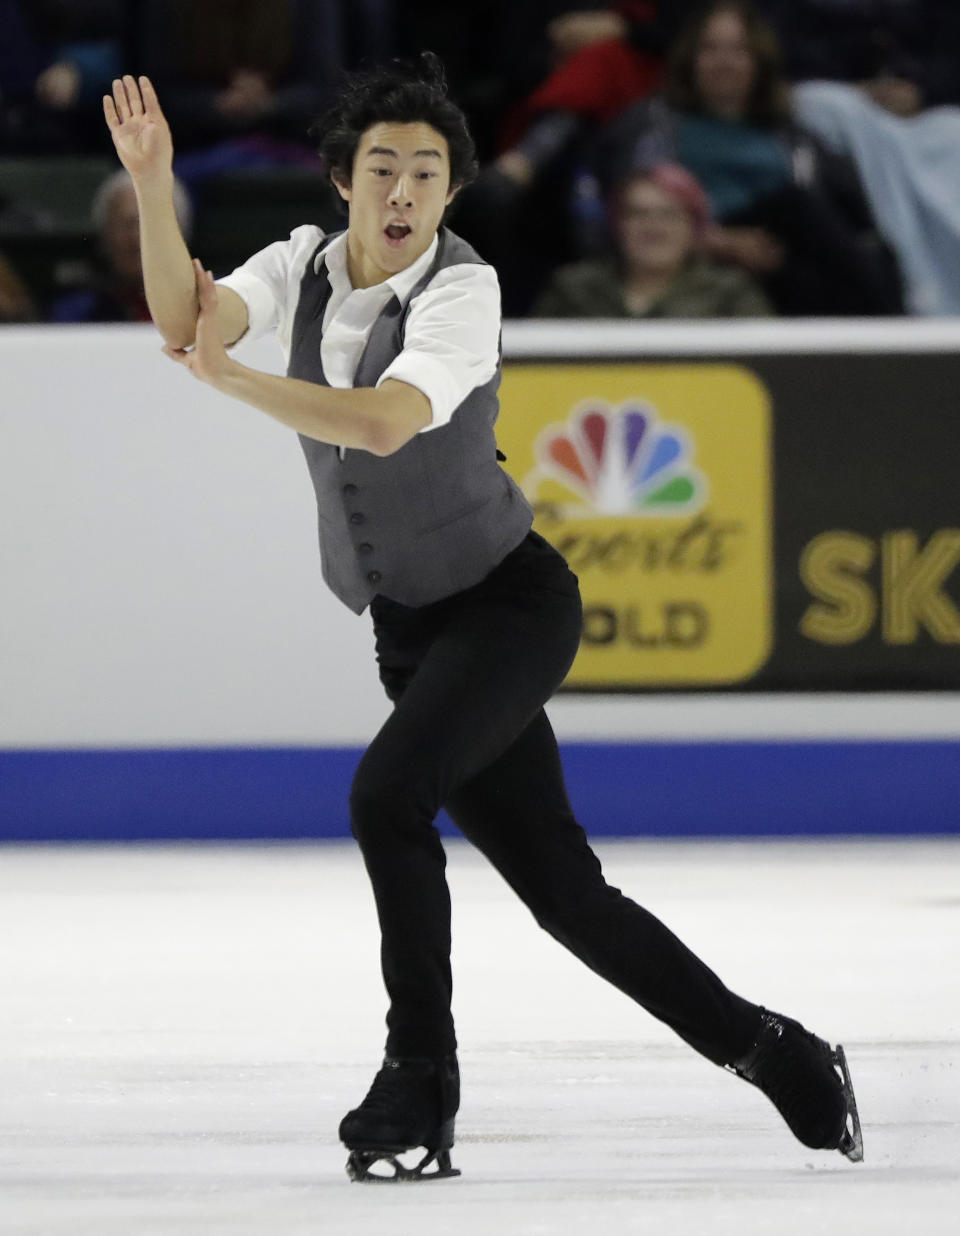 Nathan Chen of the U.S. performs during the men's short program at Skate America, Friday, Oct. 19, 2018, in Everett, Wash. (AP Photo/Ted S. Warren)